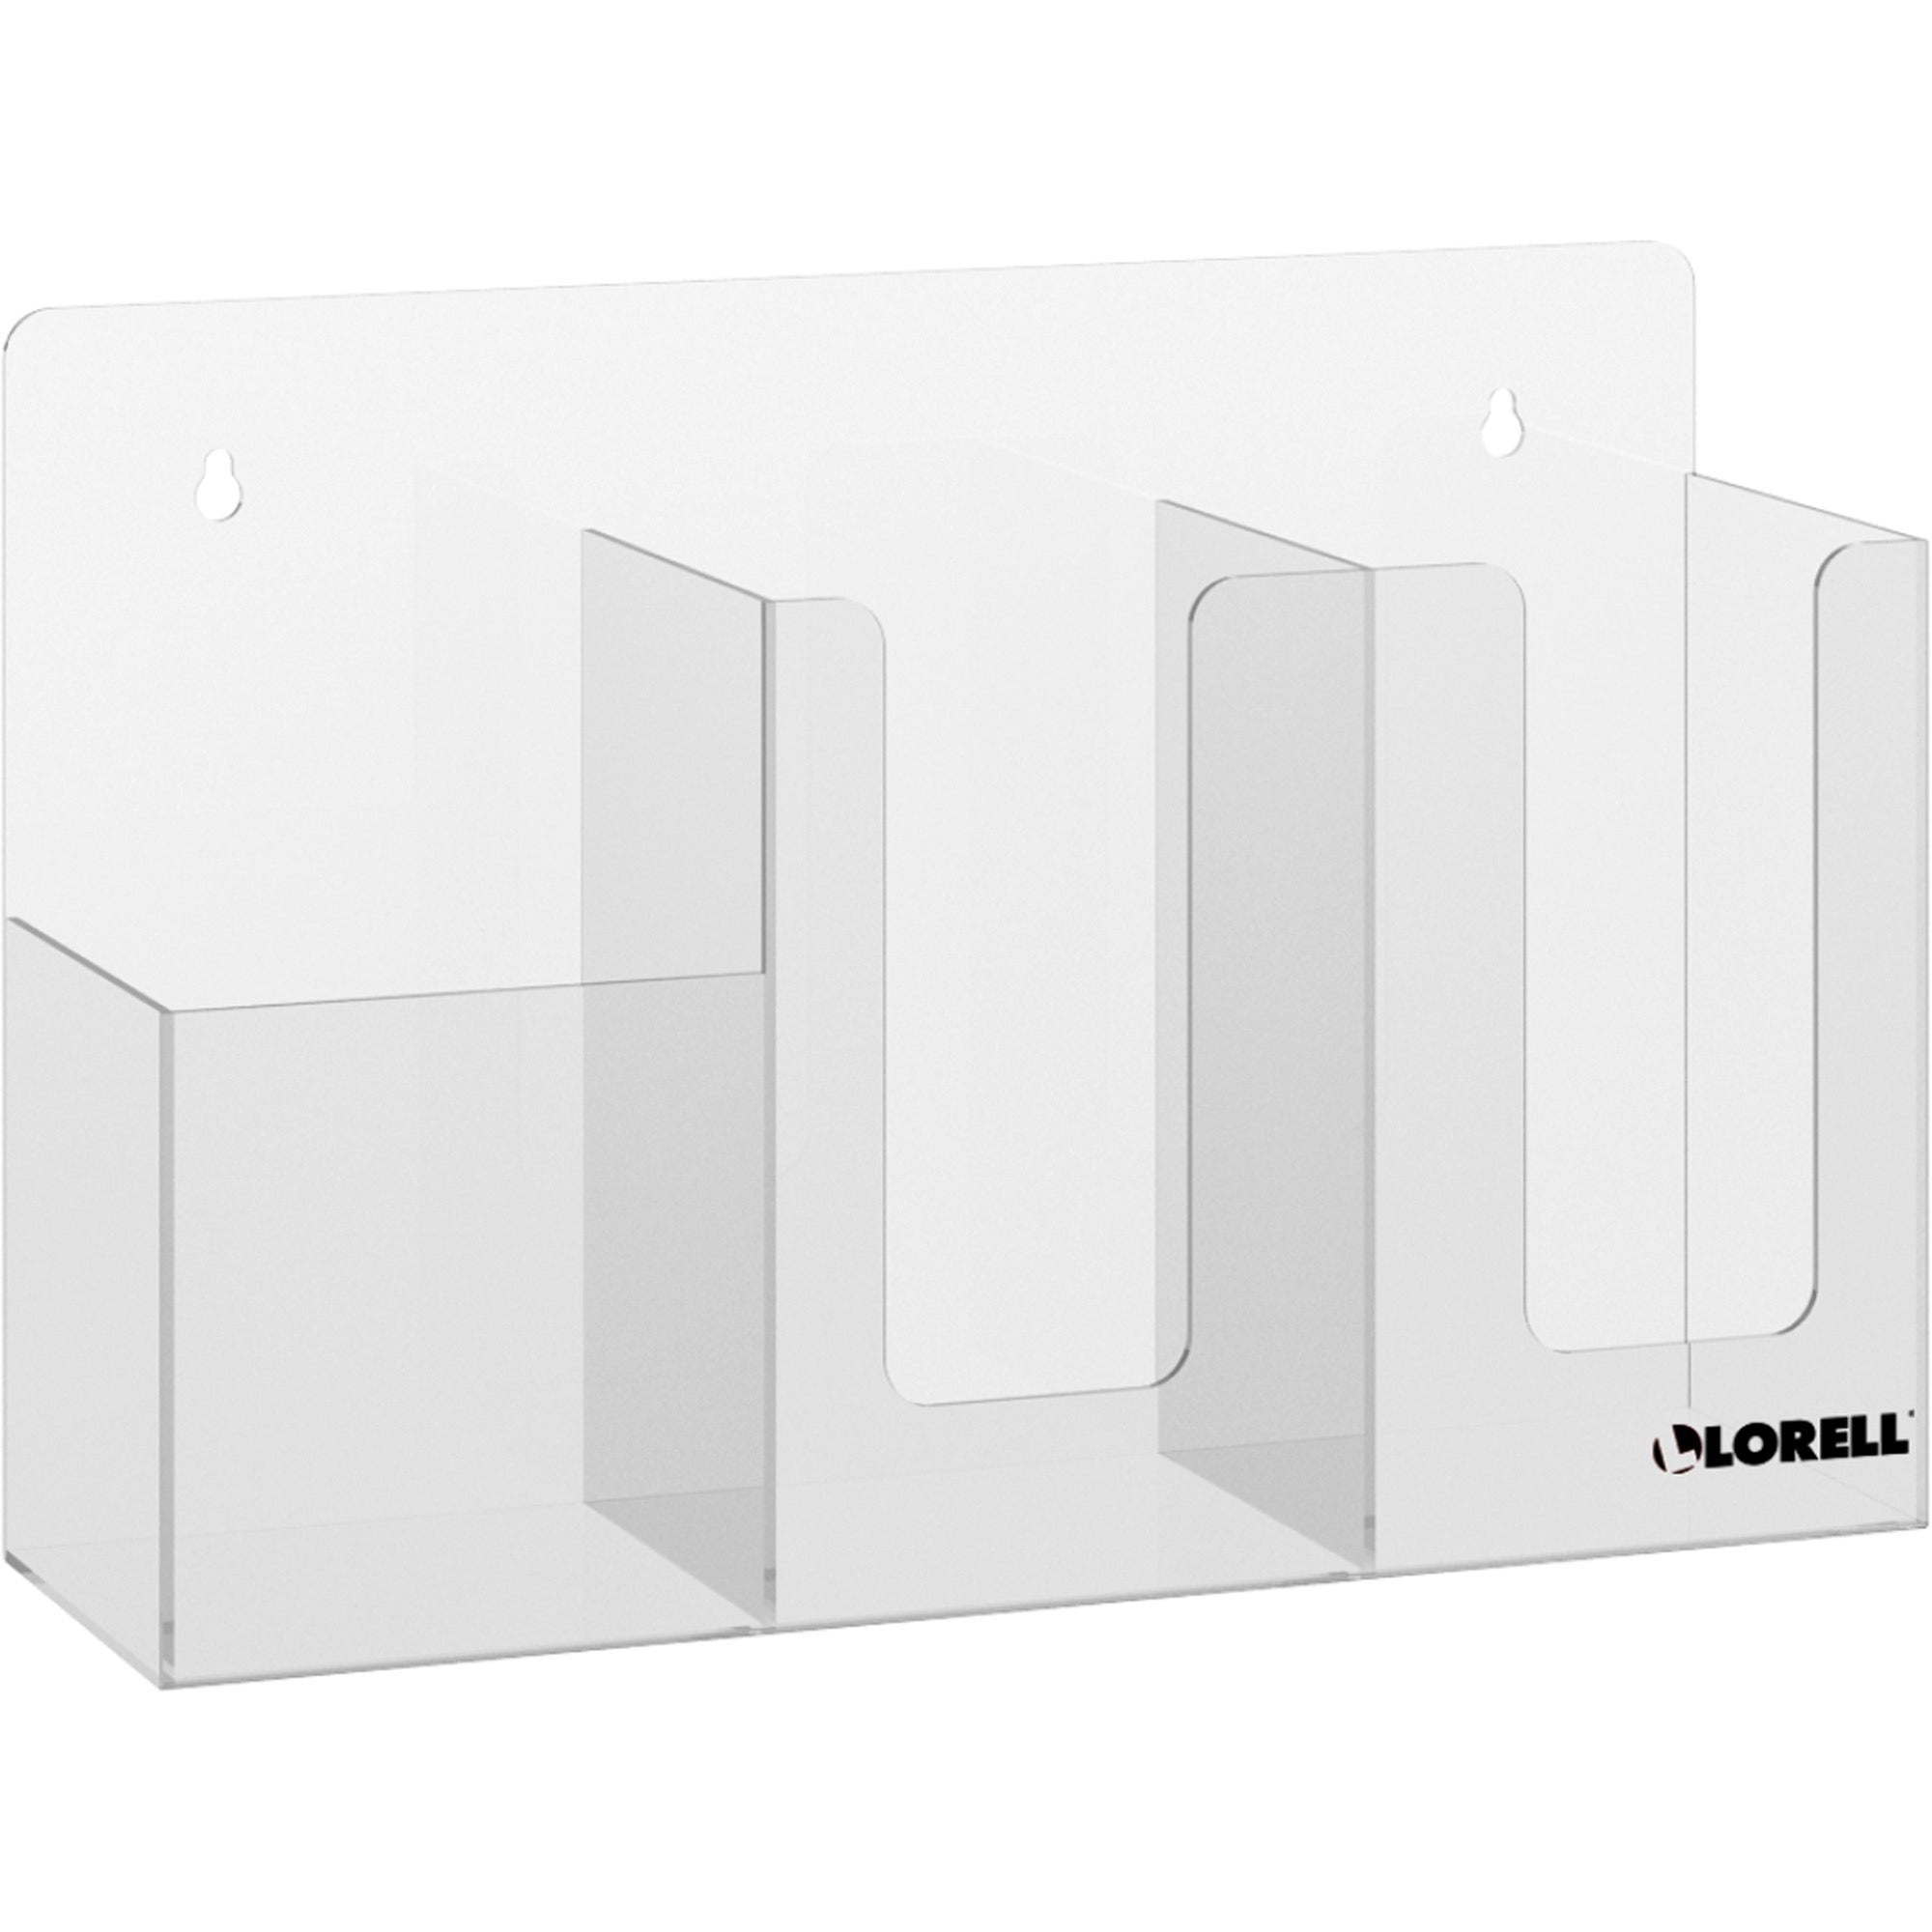 lorell-sanitation-station-99-height-x-148-width-x-45-depth-wall-mountable-freestanding-countertop-tabletop-acrylic-clear_llr03417 - 1